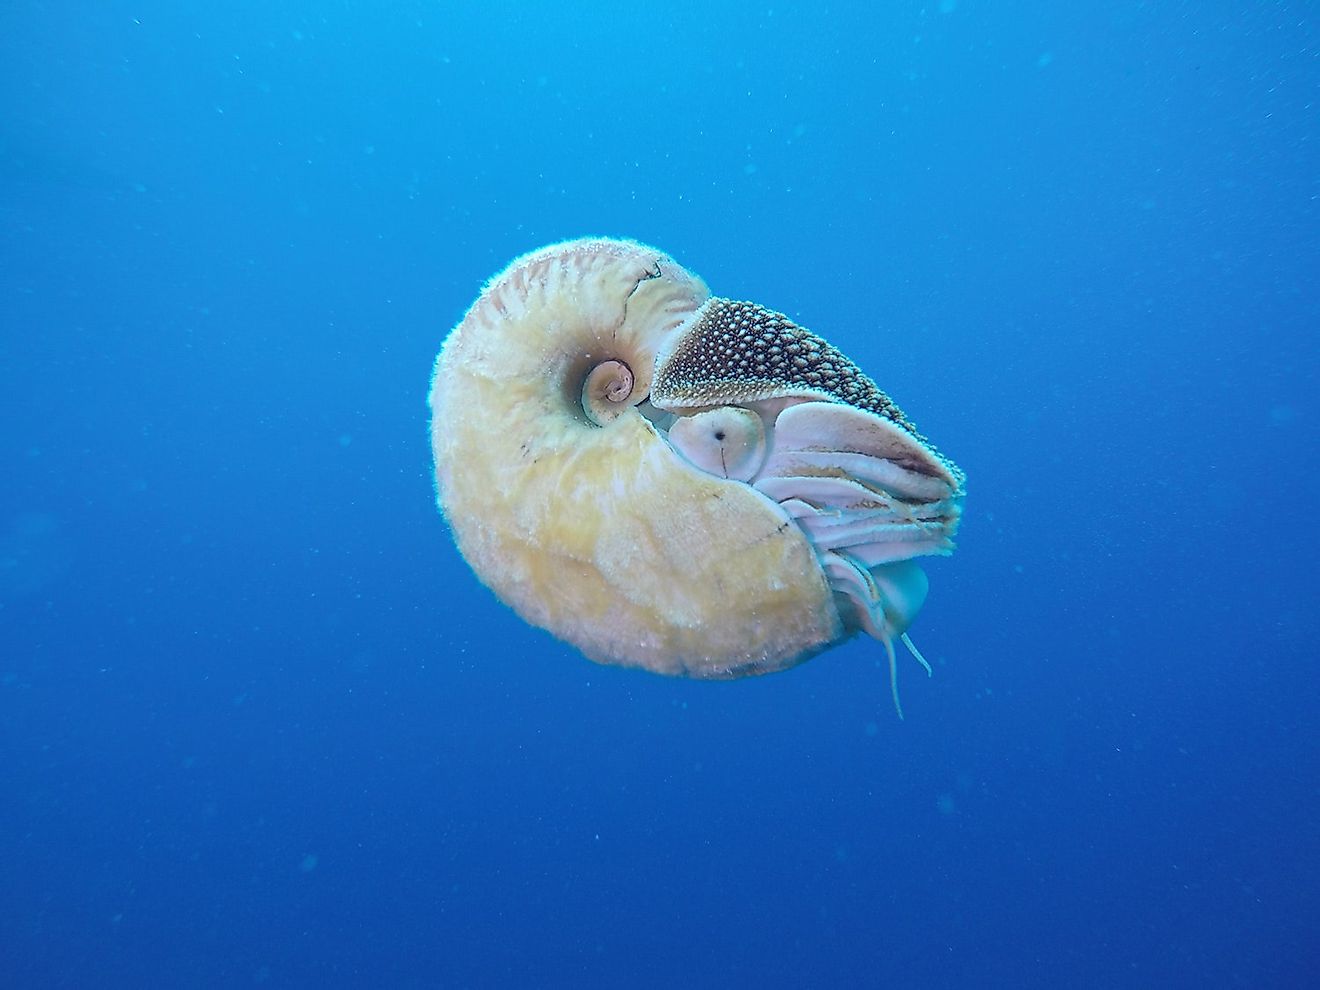 The crusty Nautilus is found around the waters close to New Guinea, more specifically Milne Bay and New Britain, while some can be found around the Solomon Islands as well. Image credit: wired.com